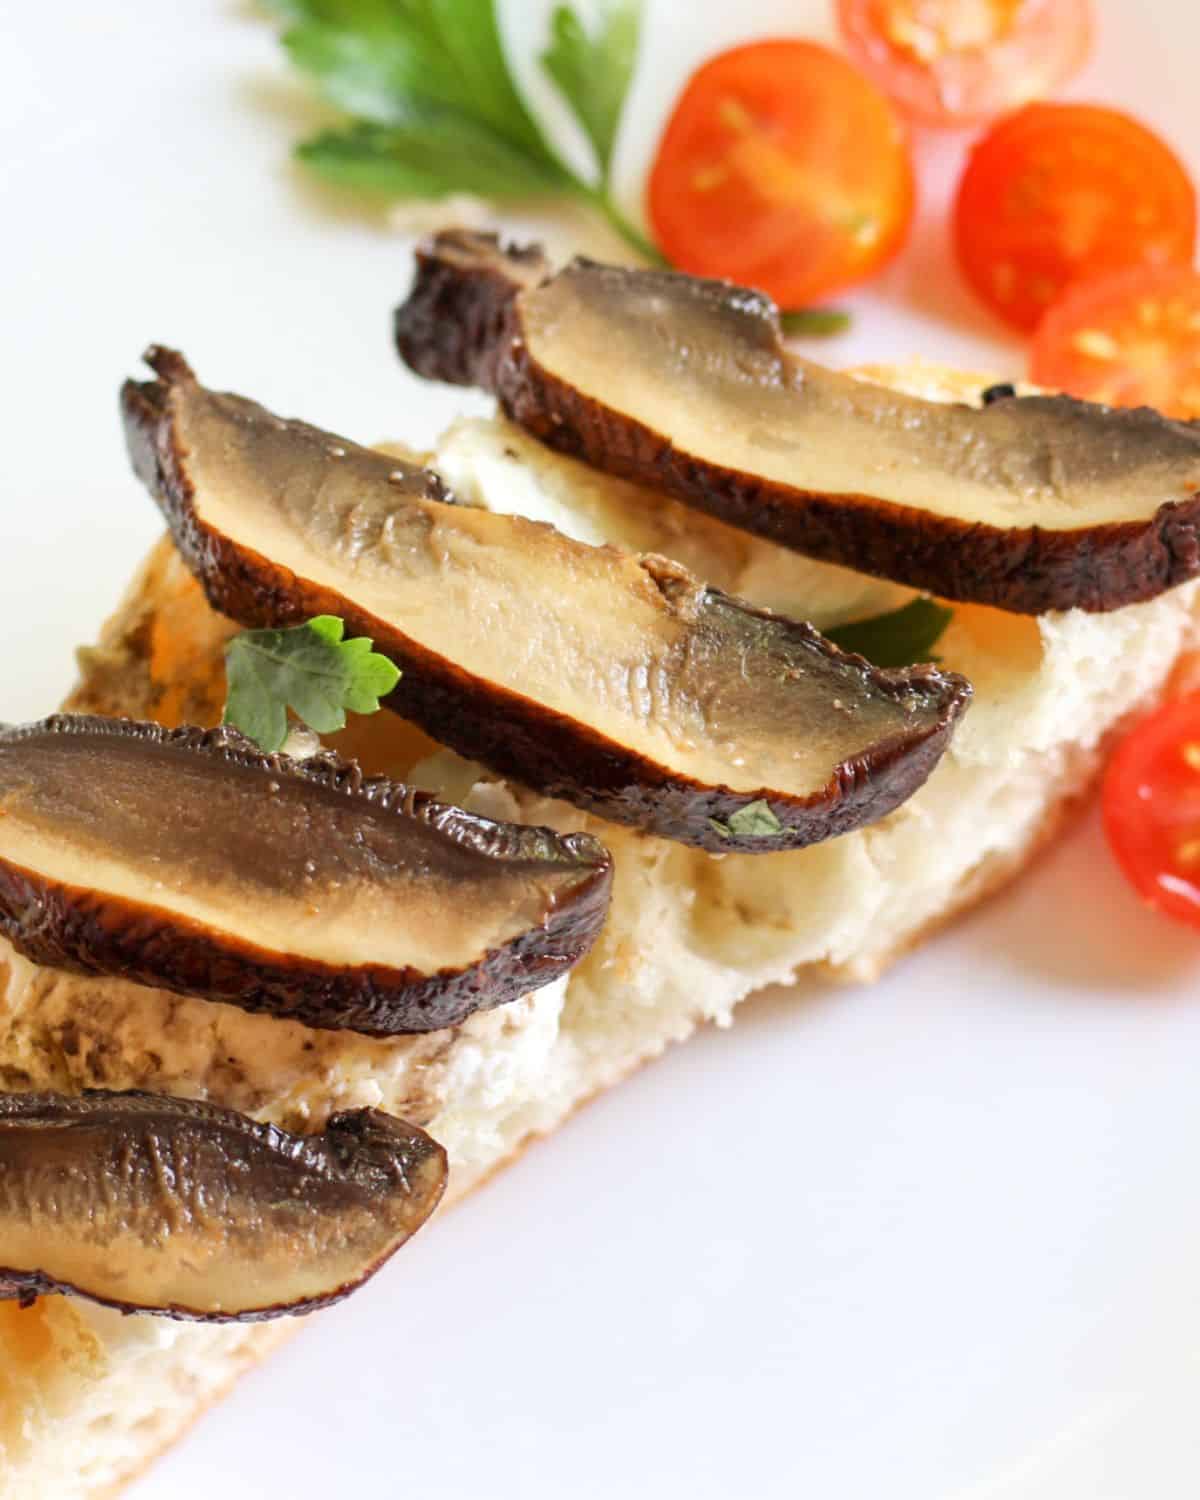 Bread with sliced cooked mushroom on top.